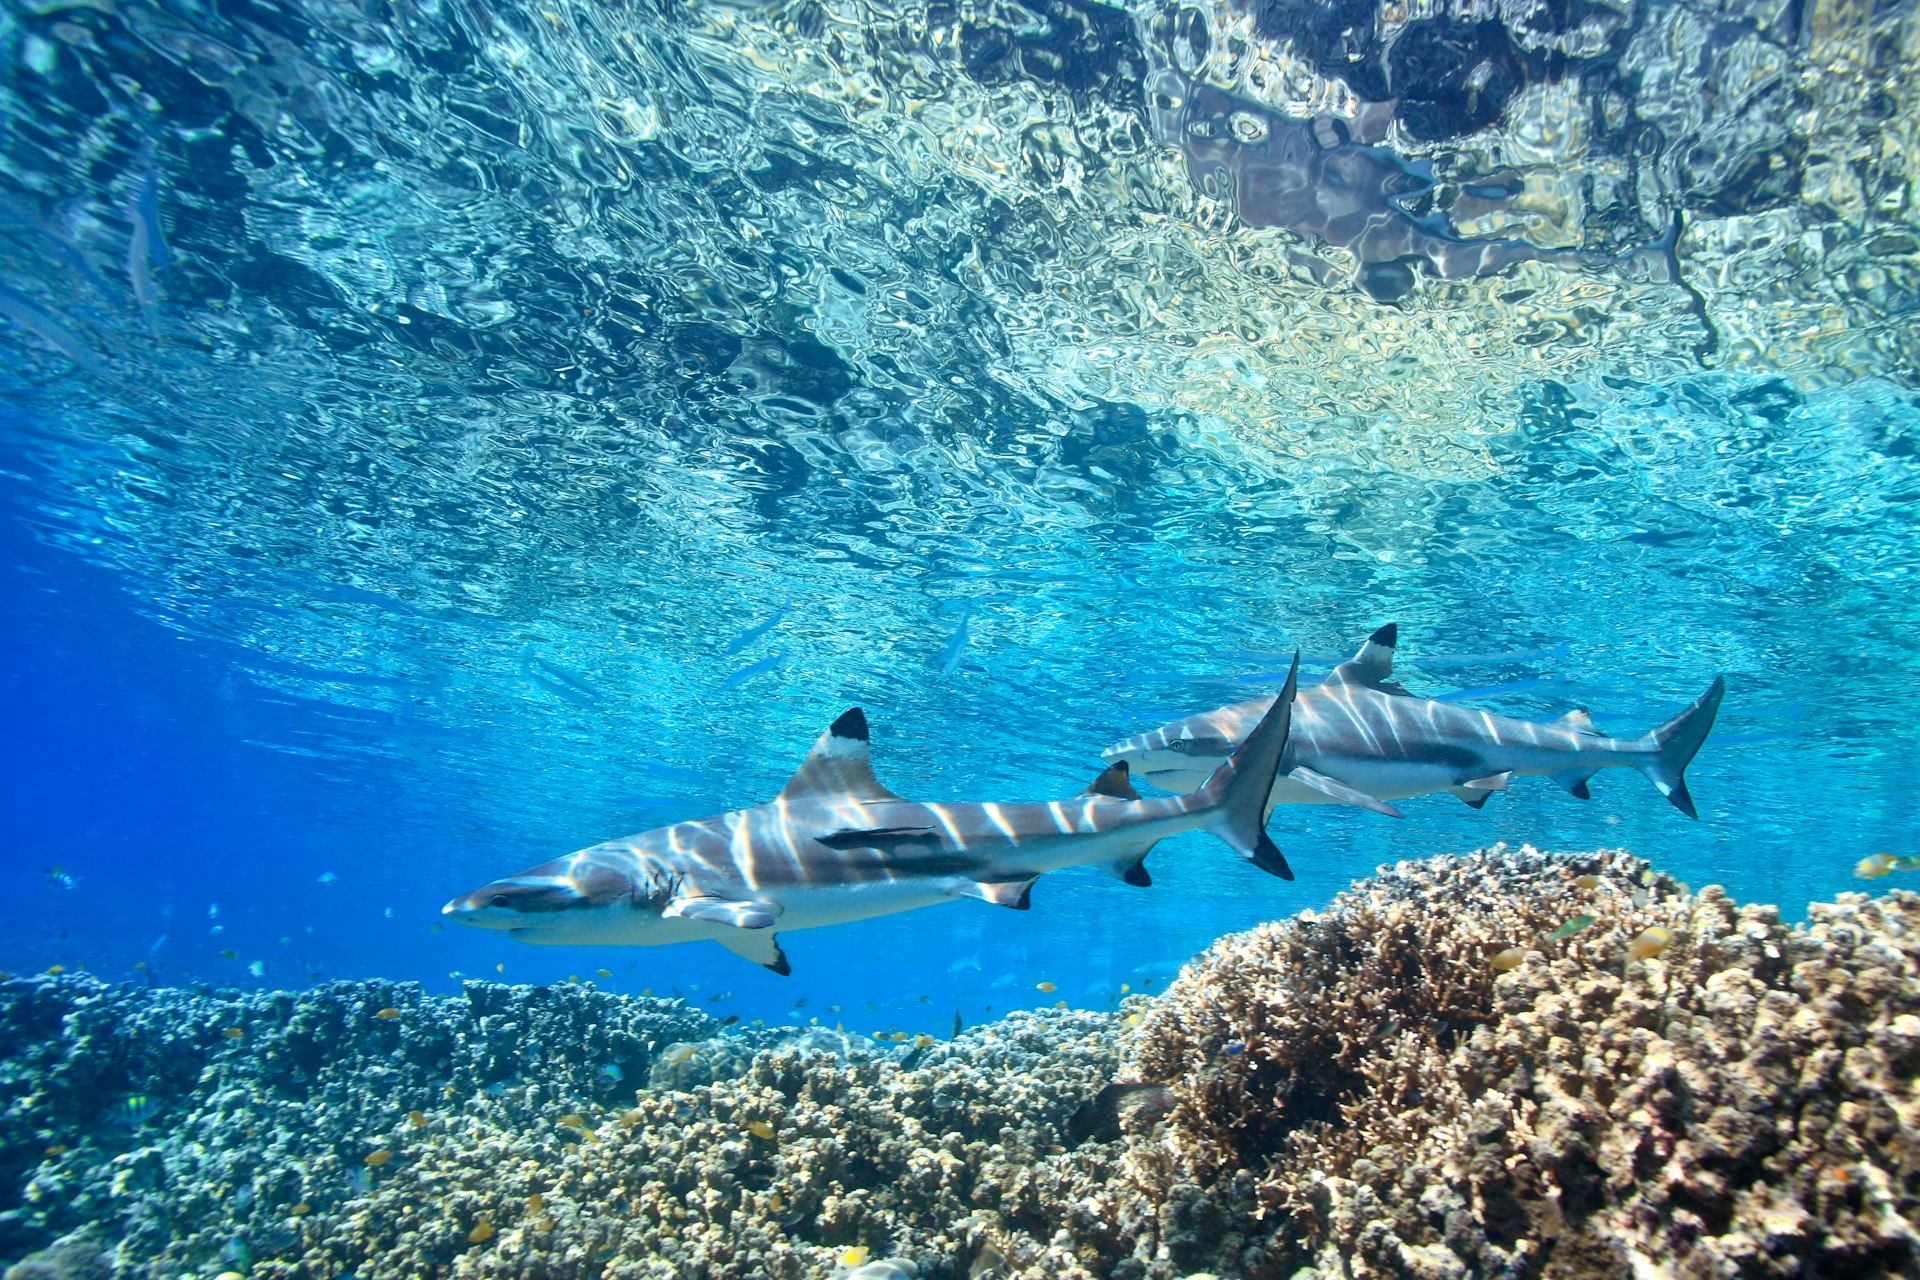 Two Blacktip Reef Sharks, Carcharhinus melantopterus, swimming over shallow corals on the reef edge with the surface above.